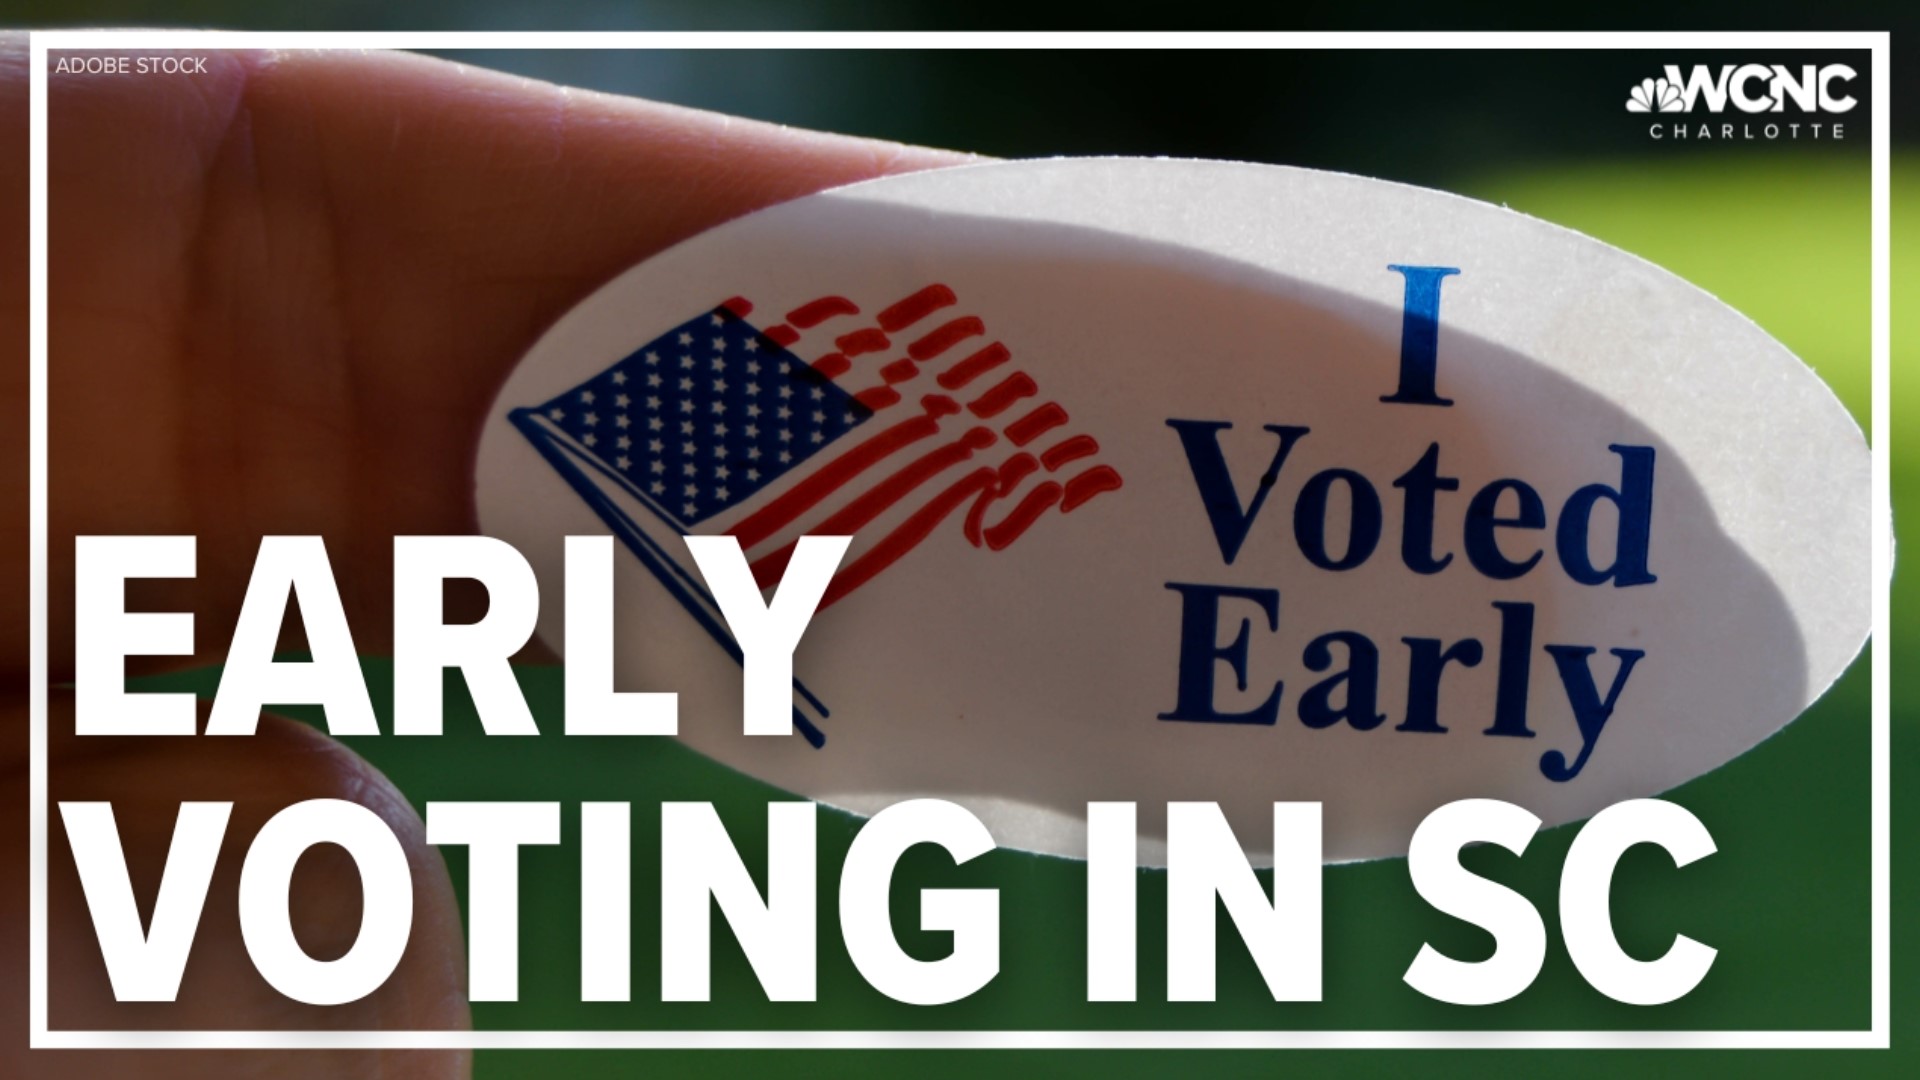 This is the first year South Carolina is allowing early voting.